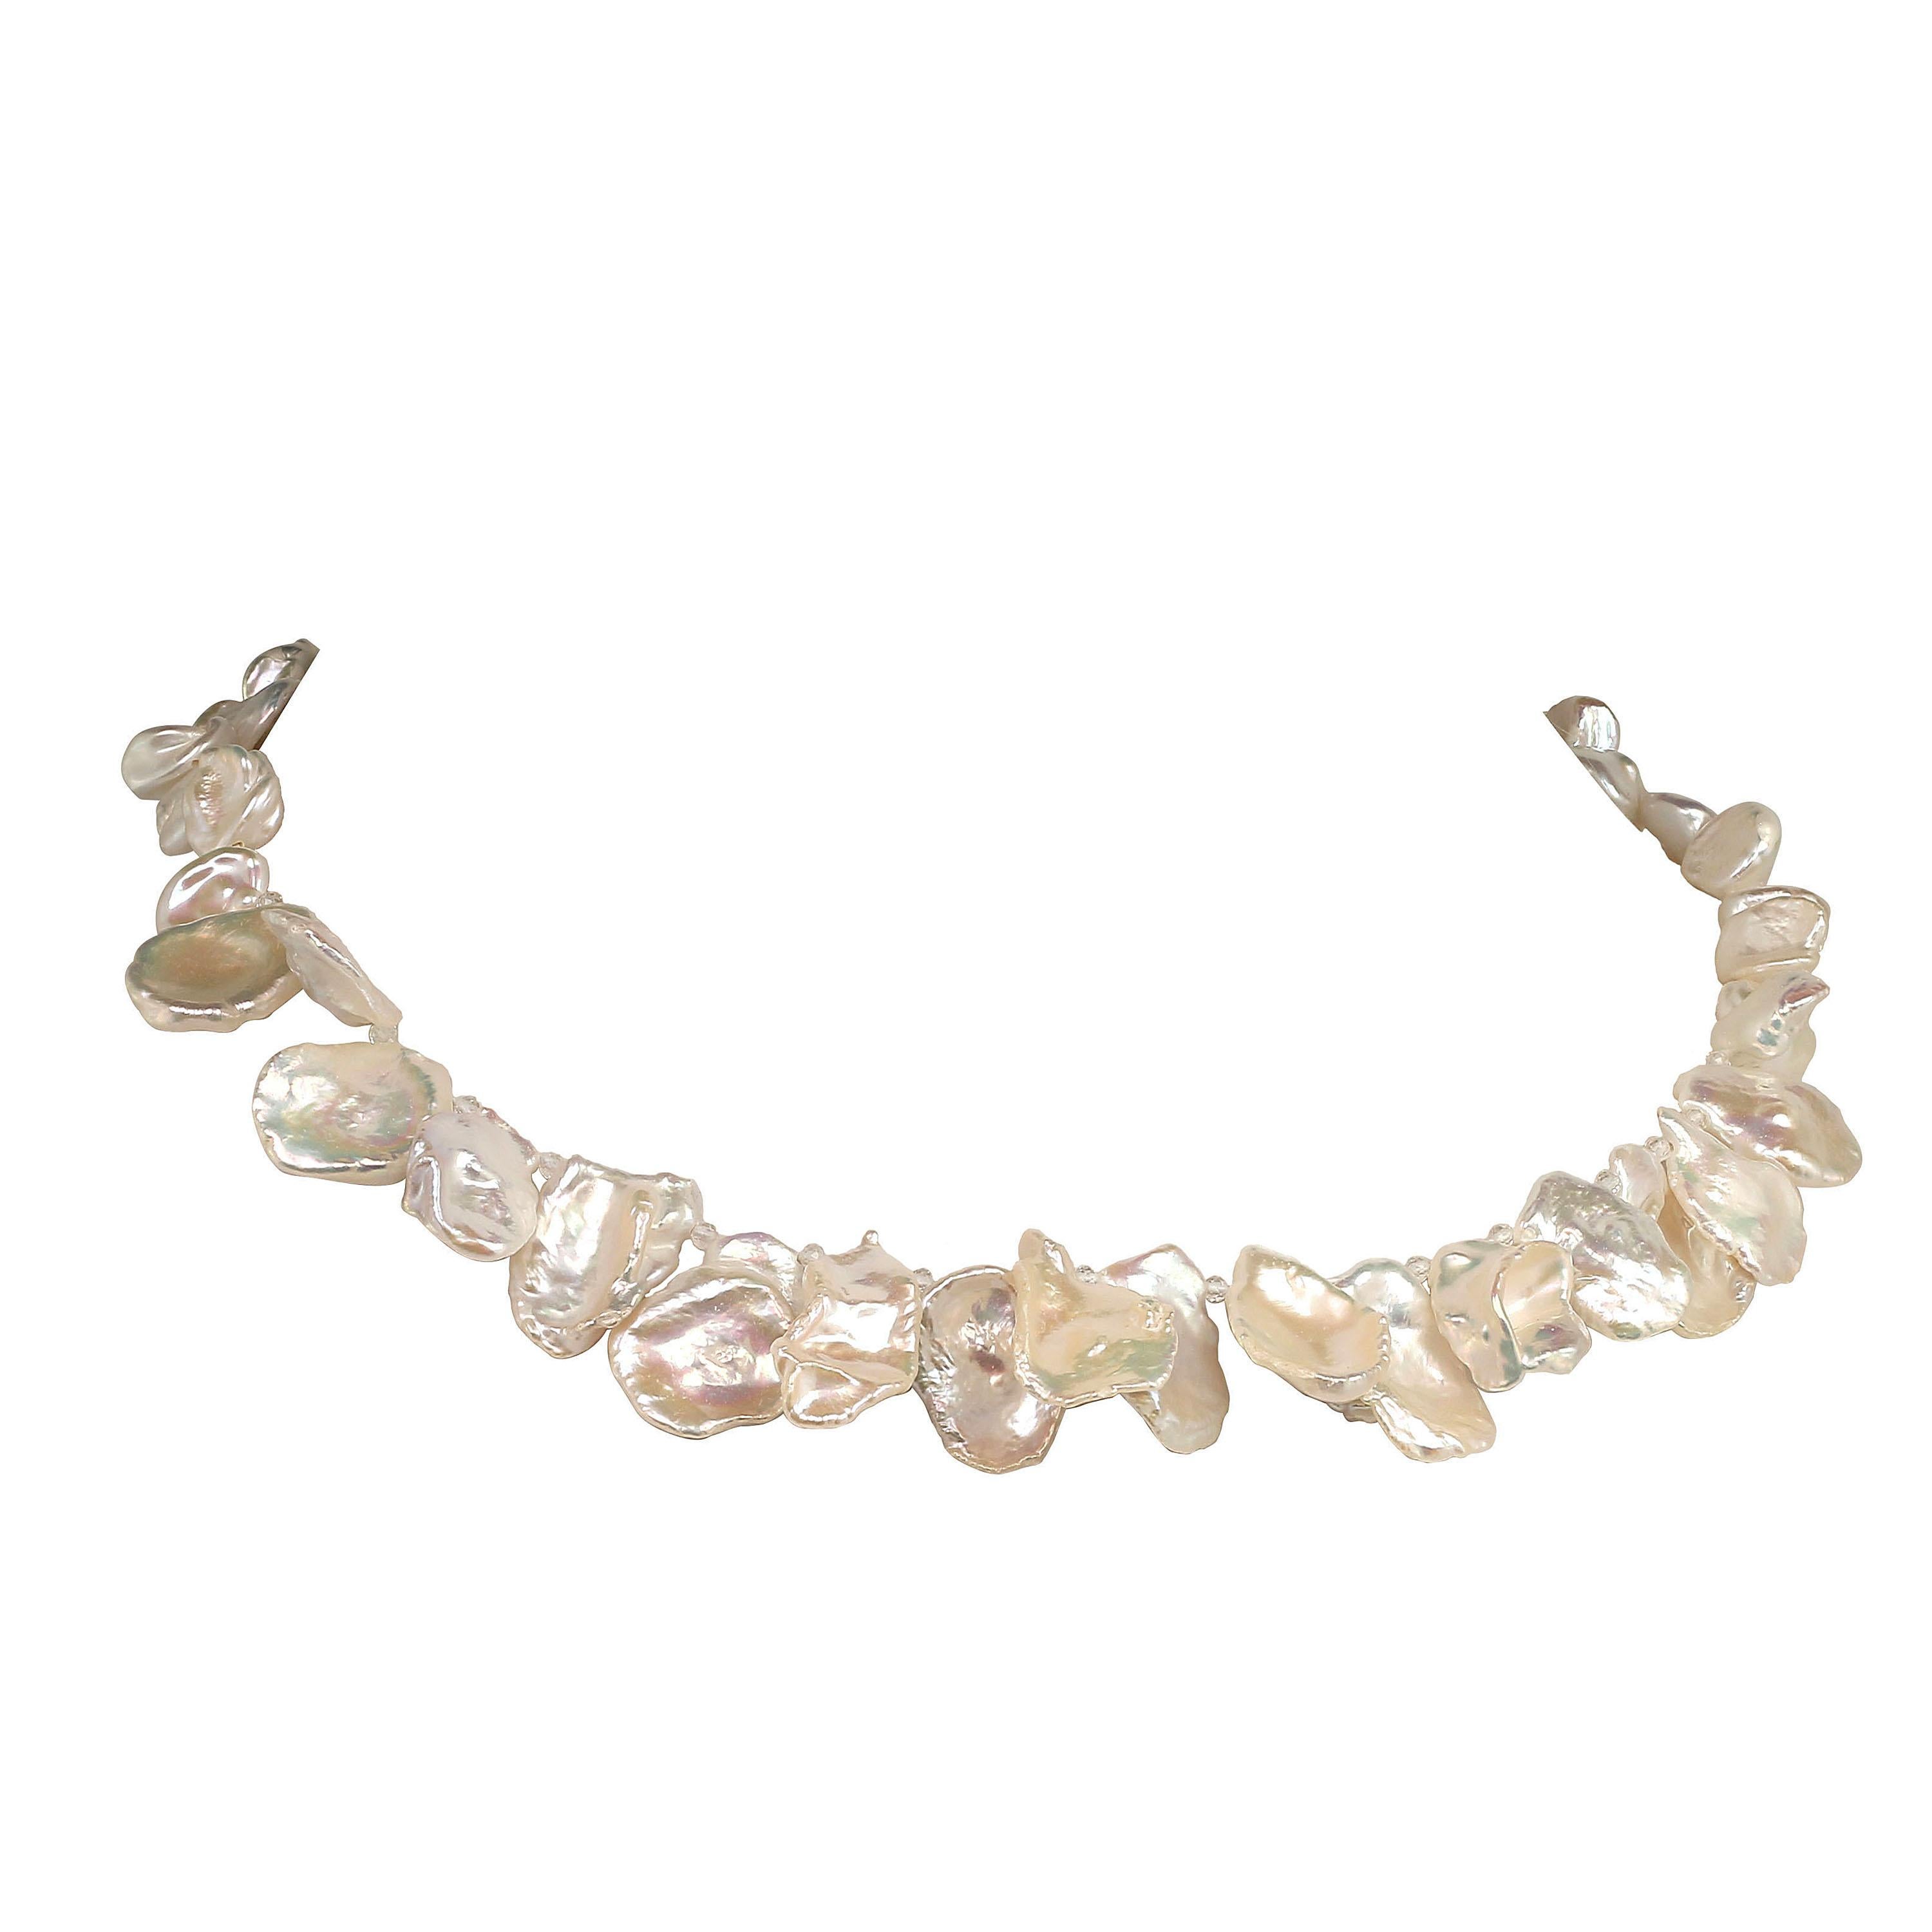 Playful, handmade choker necklace of iridescent, white Keshi Pearls in two sizes, larger across the front and more delicate around the back is a must for your jewelry wardrobe. It flutters its way right into your heart. This choker necklace is 16.5